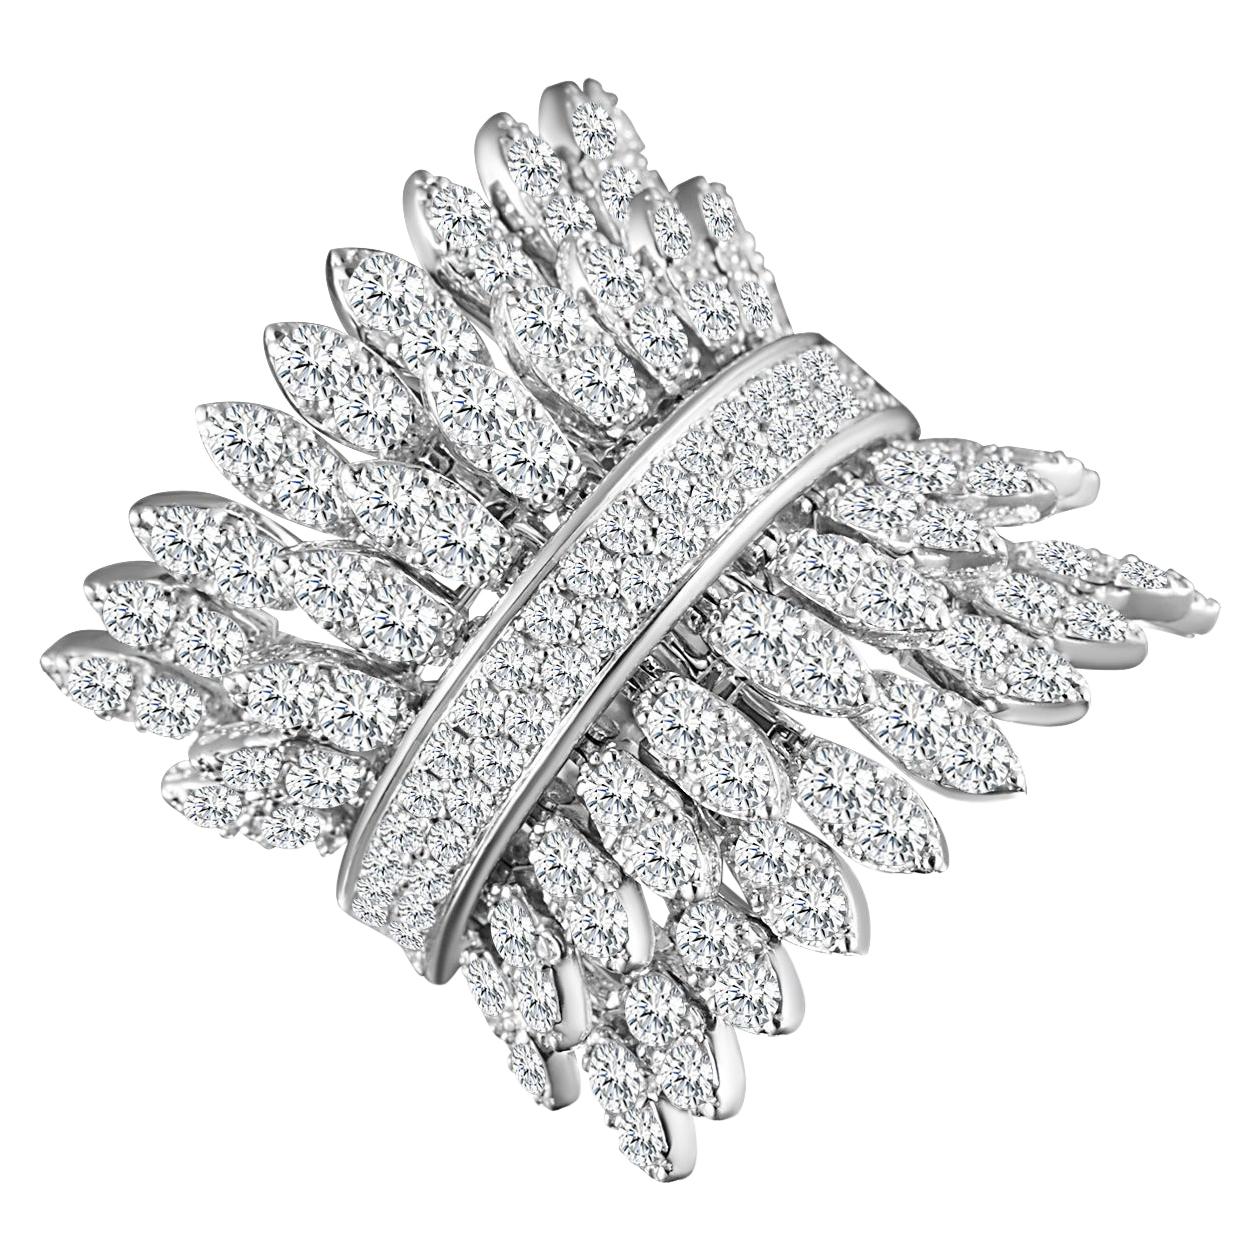 Modern White Gold Kinetic Double Petal Diamond Cocktail Ring For Sale